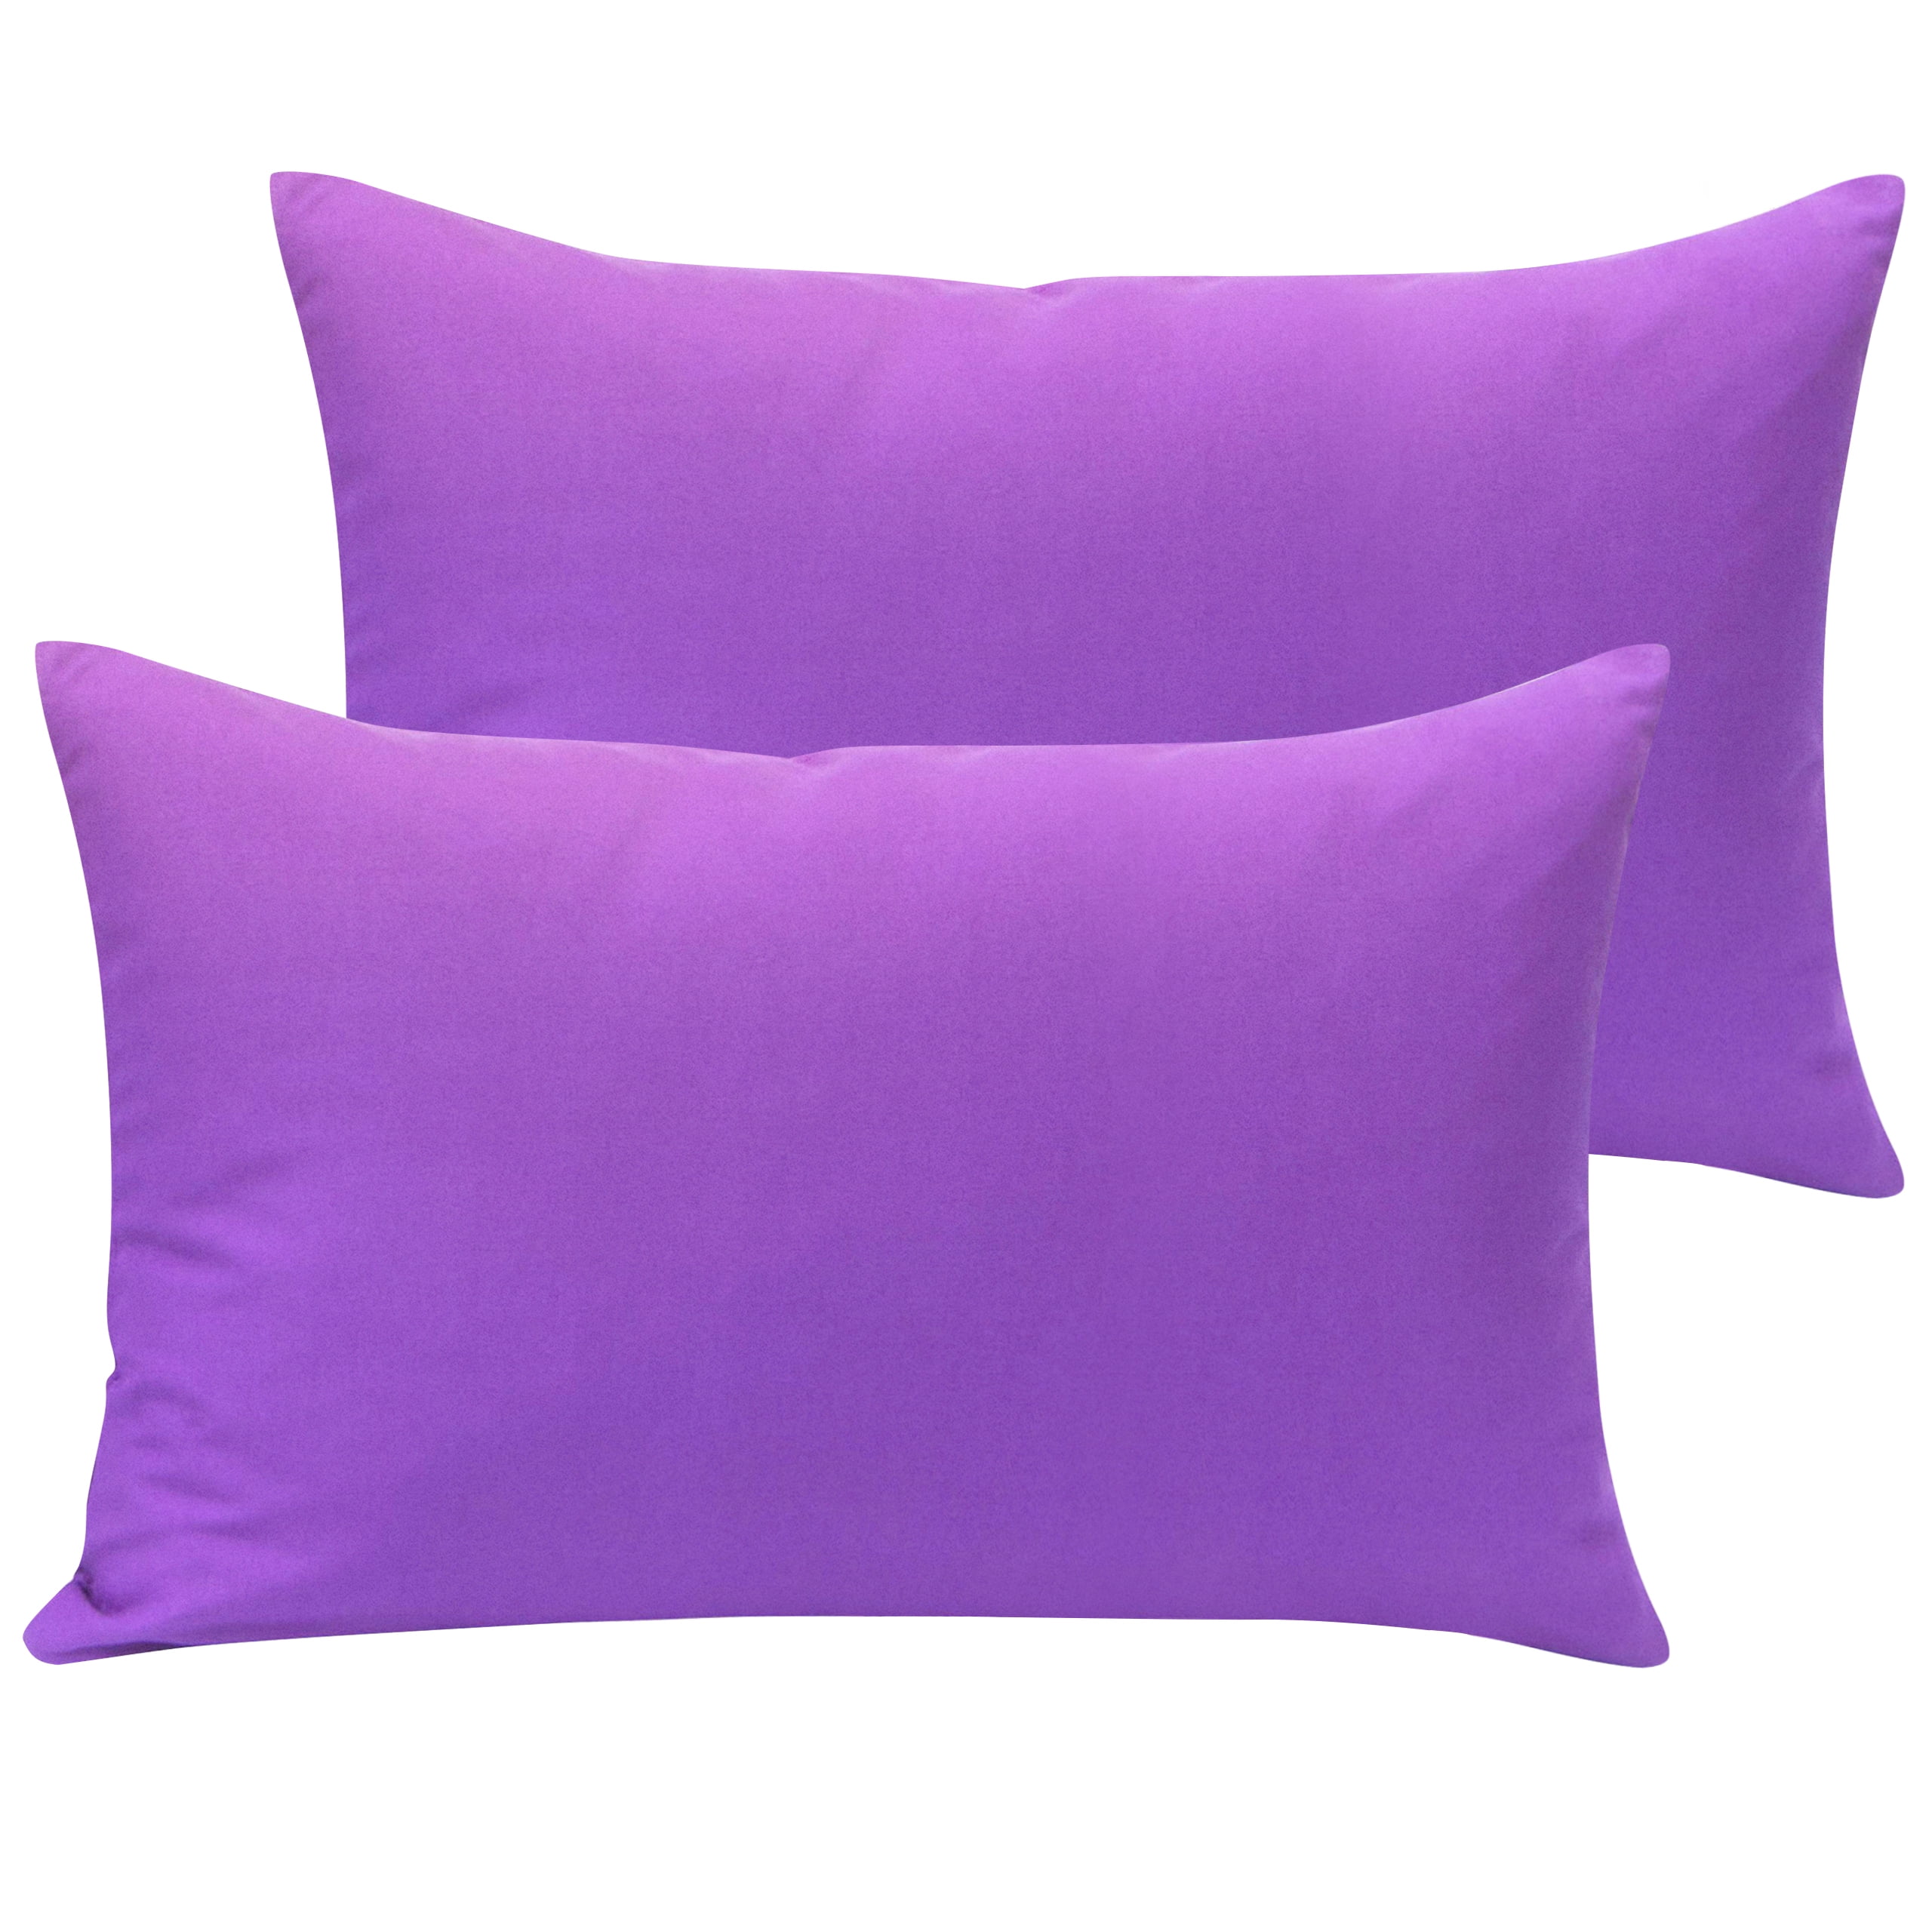 EXQ Home Toddler Pillowcases 14x20 Travel Pillow Case Set of 2 13x18 Purple Small Pillow Case Fits Baby Pillow Sized 12x16 Kids Pillowcases 2 Pack Machine Washable with Envelope Closure 